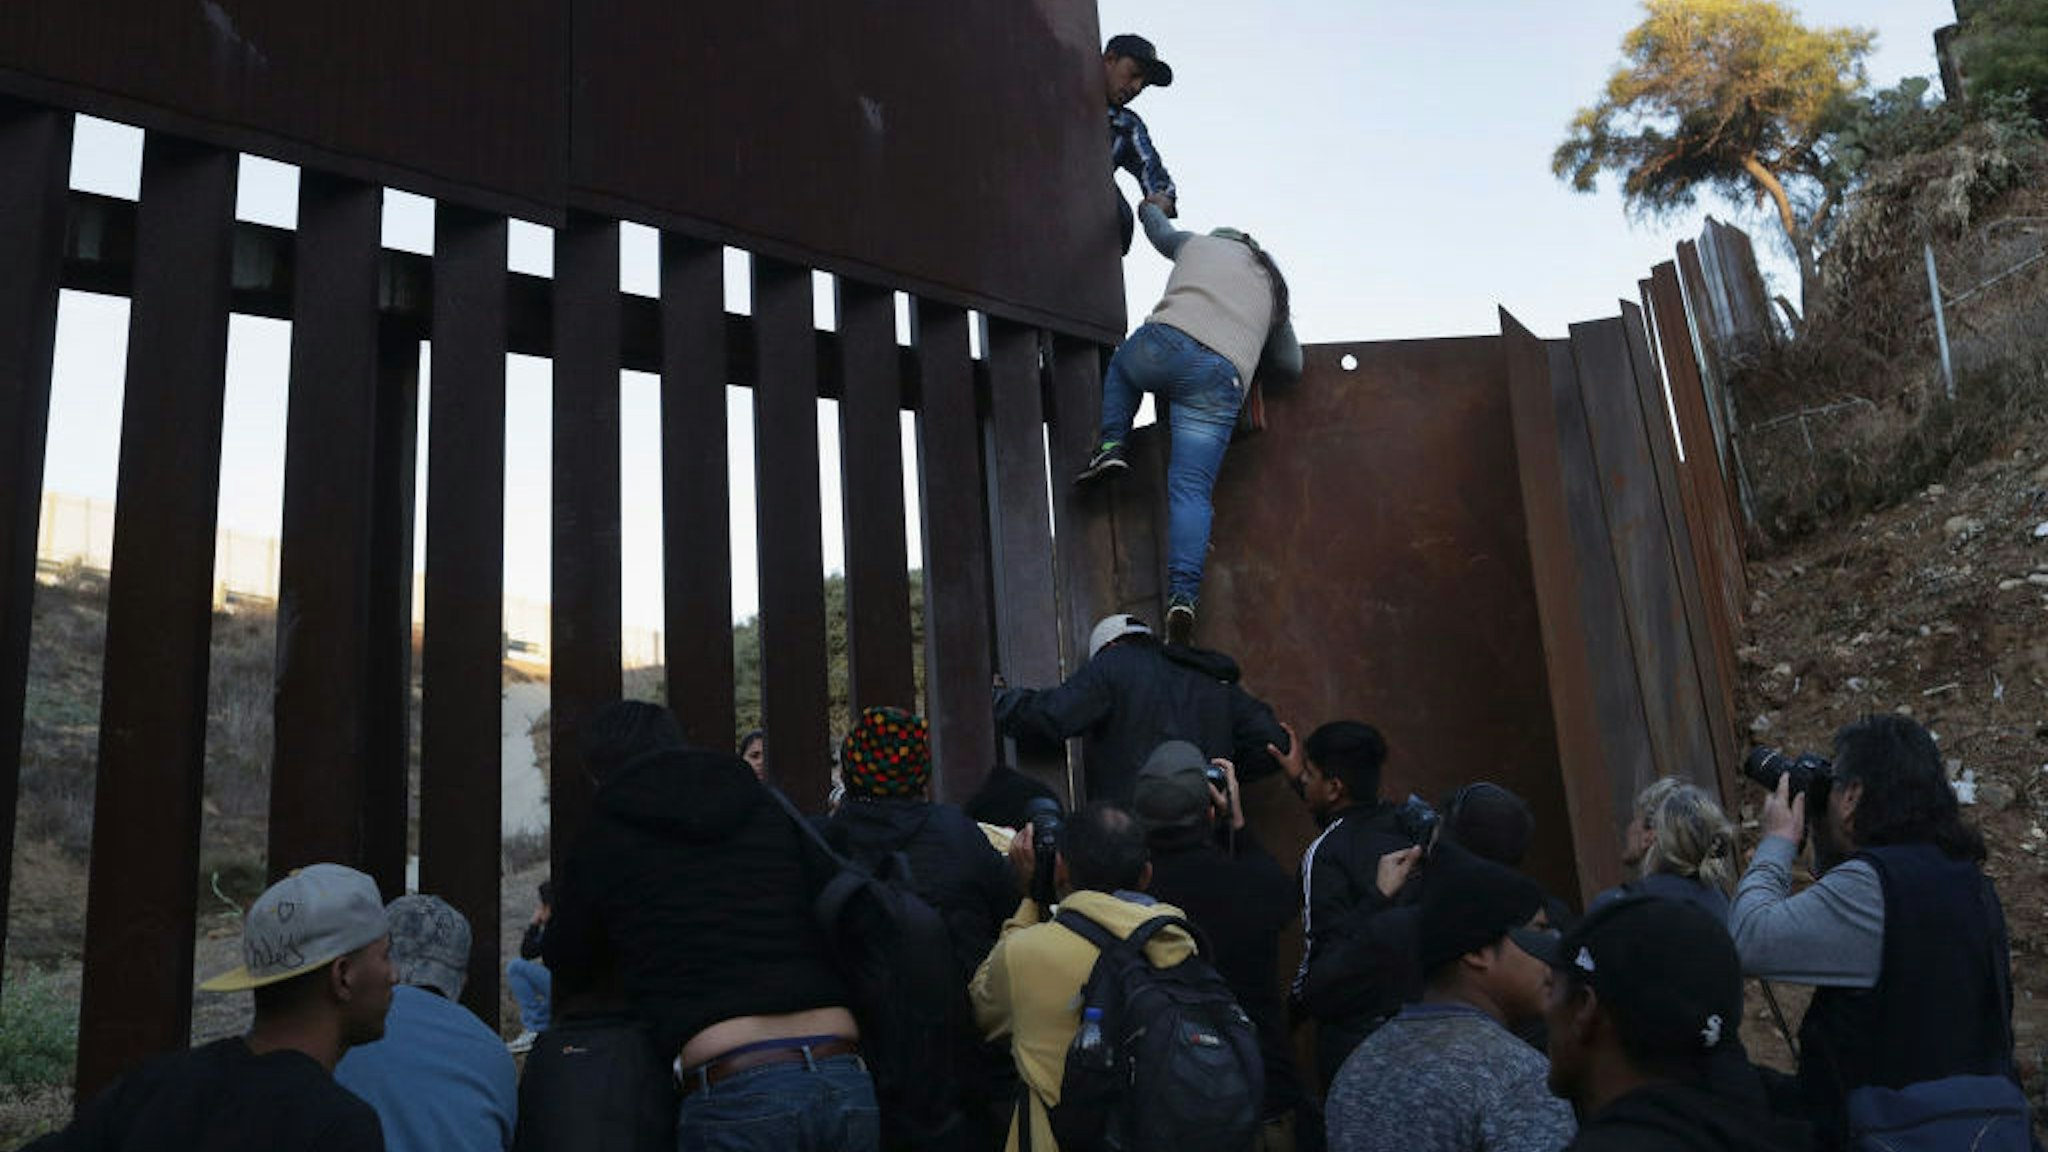 A woman climbs atop a fellow member of the migrant caravan while crossing over the U.S.-Mexico border fence on December 2, 2018 from Tijuana, Mexico. Numerous members of the caravan were able to pass from Tijuana to San Diego and were quickly taken into custody by U.S. Border Patrol agents. Most had planned to request political asylum in the United States after traveling more than 6 weeks from Central America. (Photo by John Moore/Getty Images)